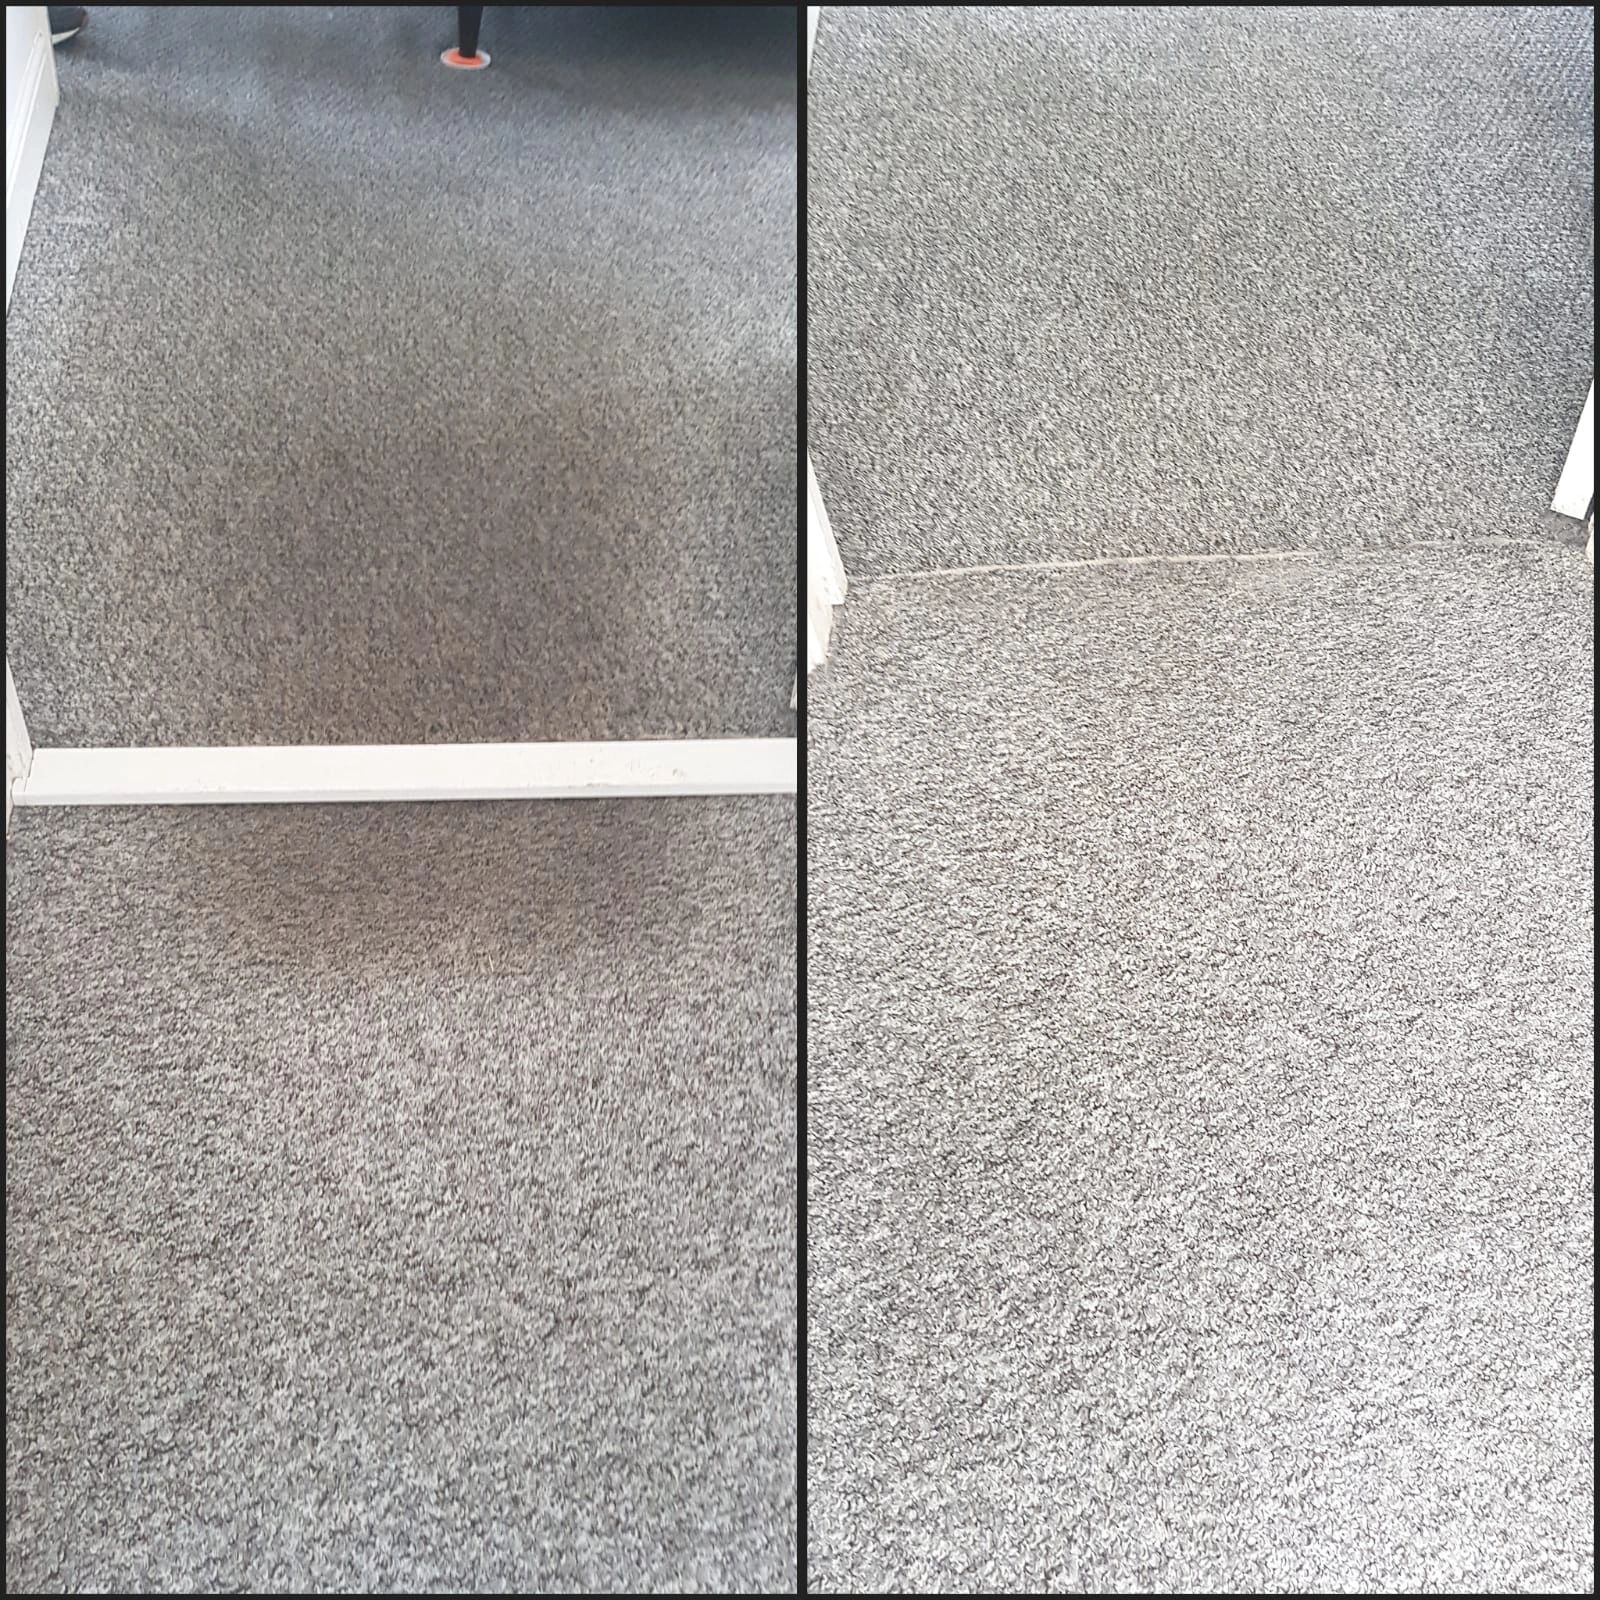 Heavily soiled  entrance from  a hallway to lounge being Professionally cleaned